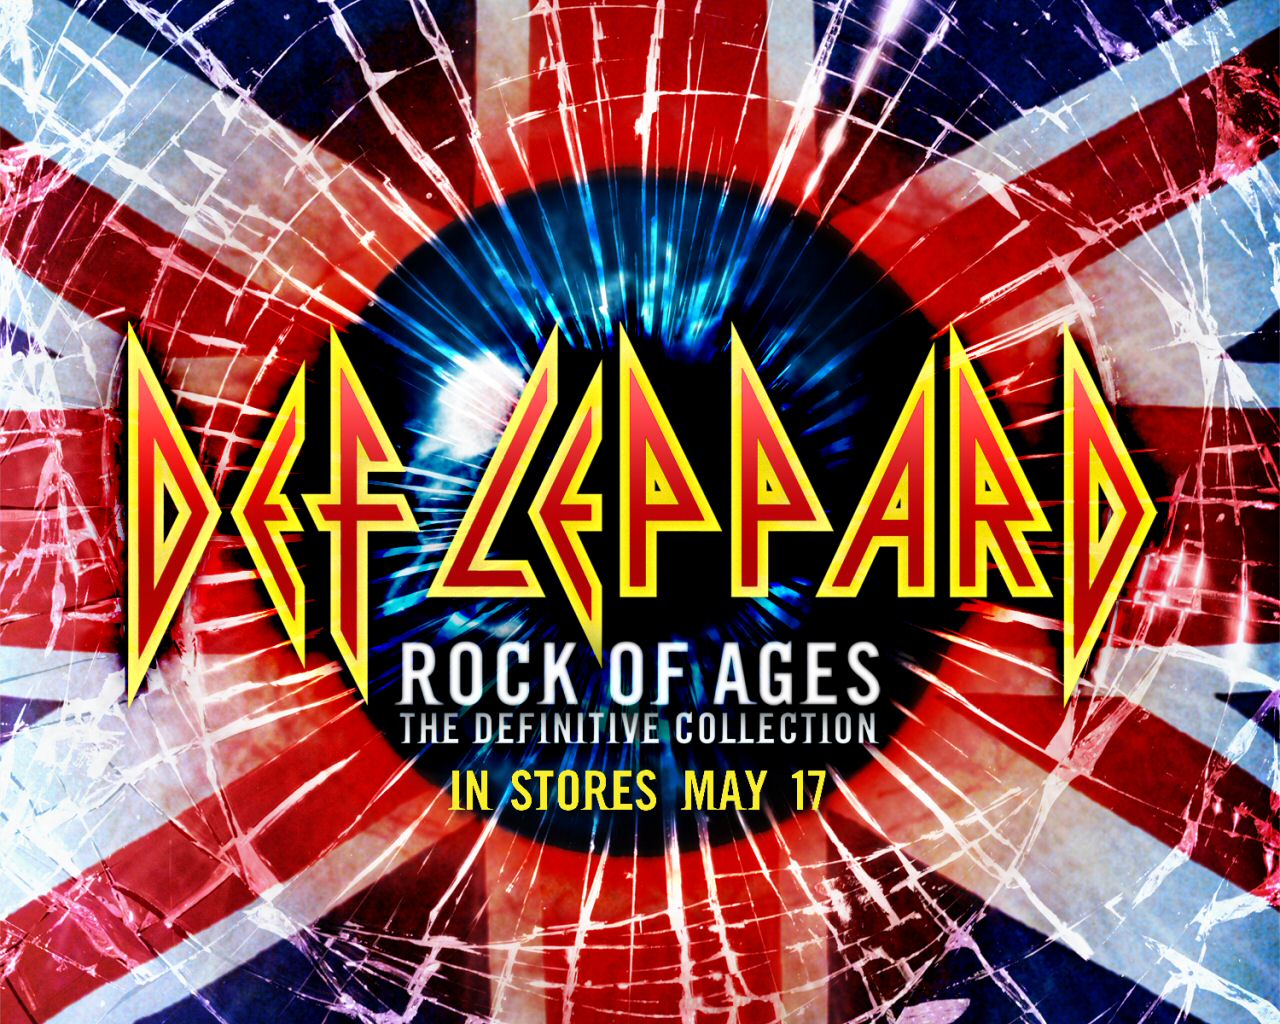 19 Def Leppard Wallpapers  Def Leppard Backgrounds  Def leppard wallpaper  Def leppard Def leppard logo